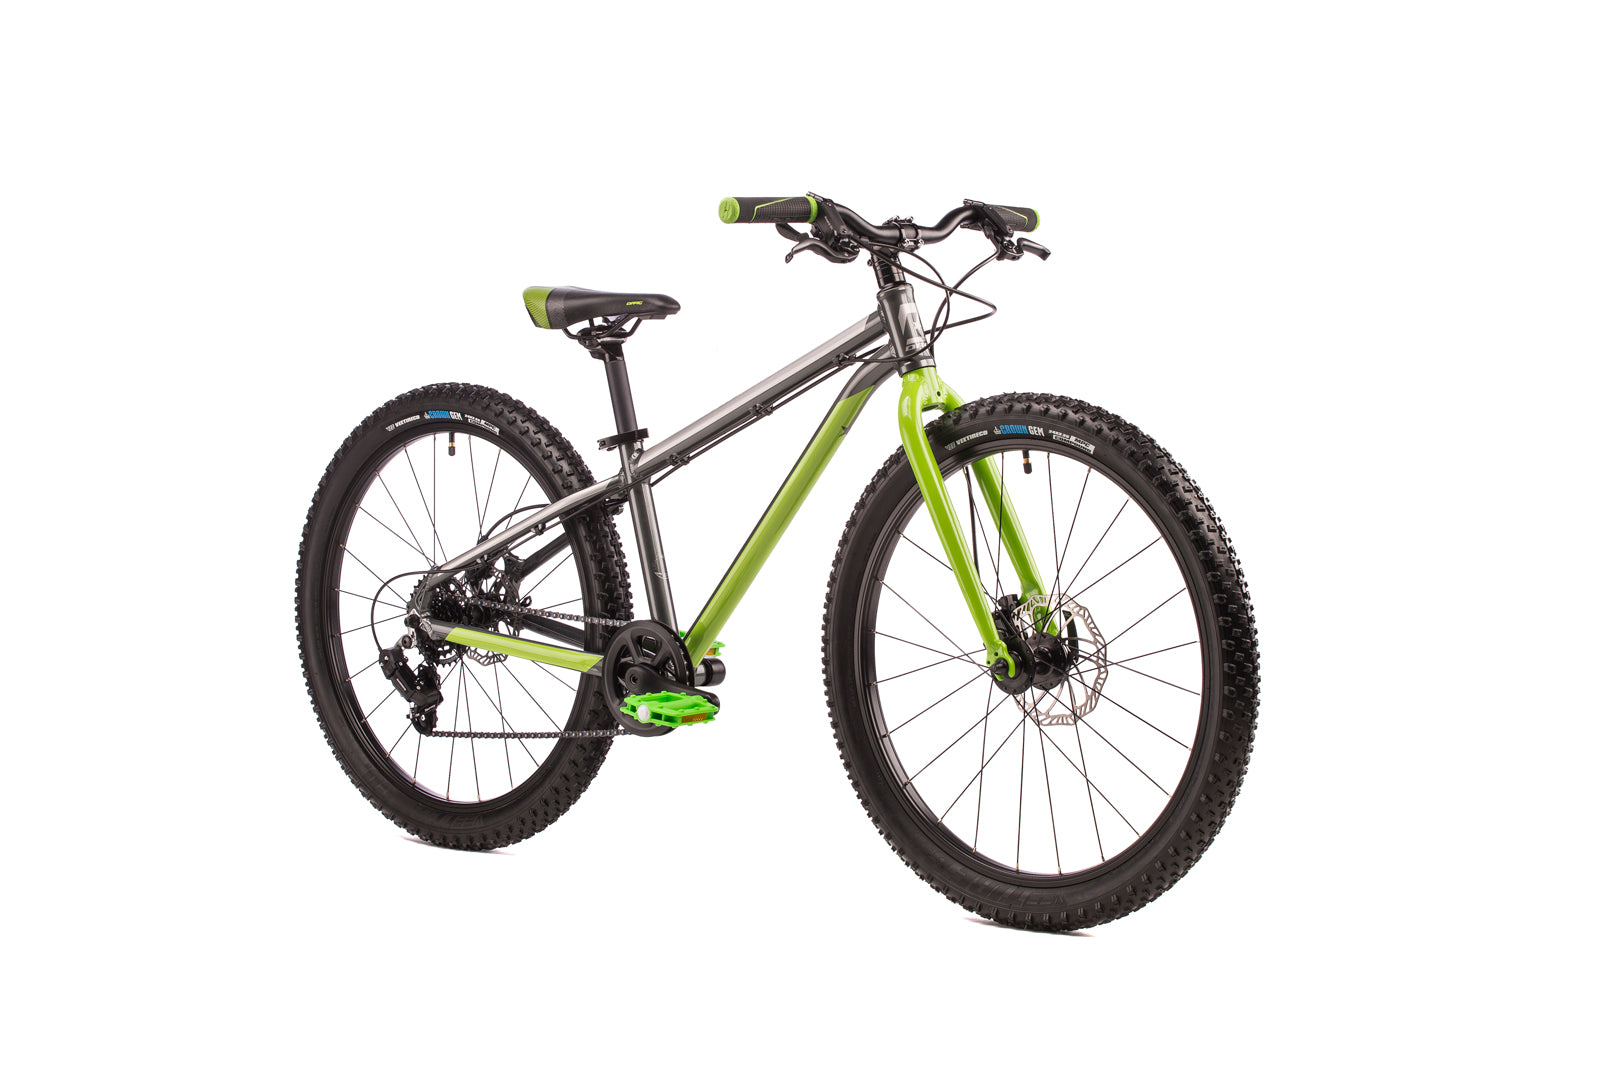 Kids Bike 10 Month Payment Plan-Bicycles-Chain Driven Cycles-Drag Badger Lite Disc 24 €114 + (10 x €55 monthly)-Chain Driven Cycles-Bike Shop-Ireland